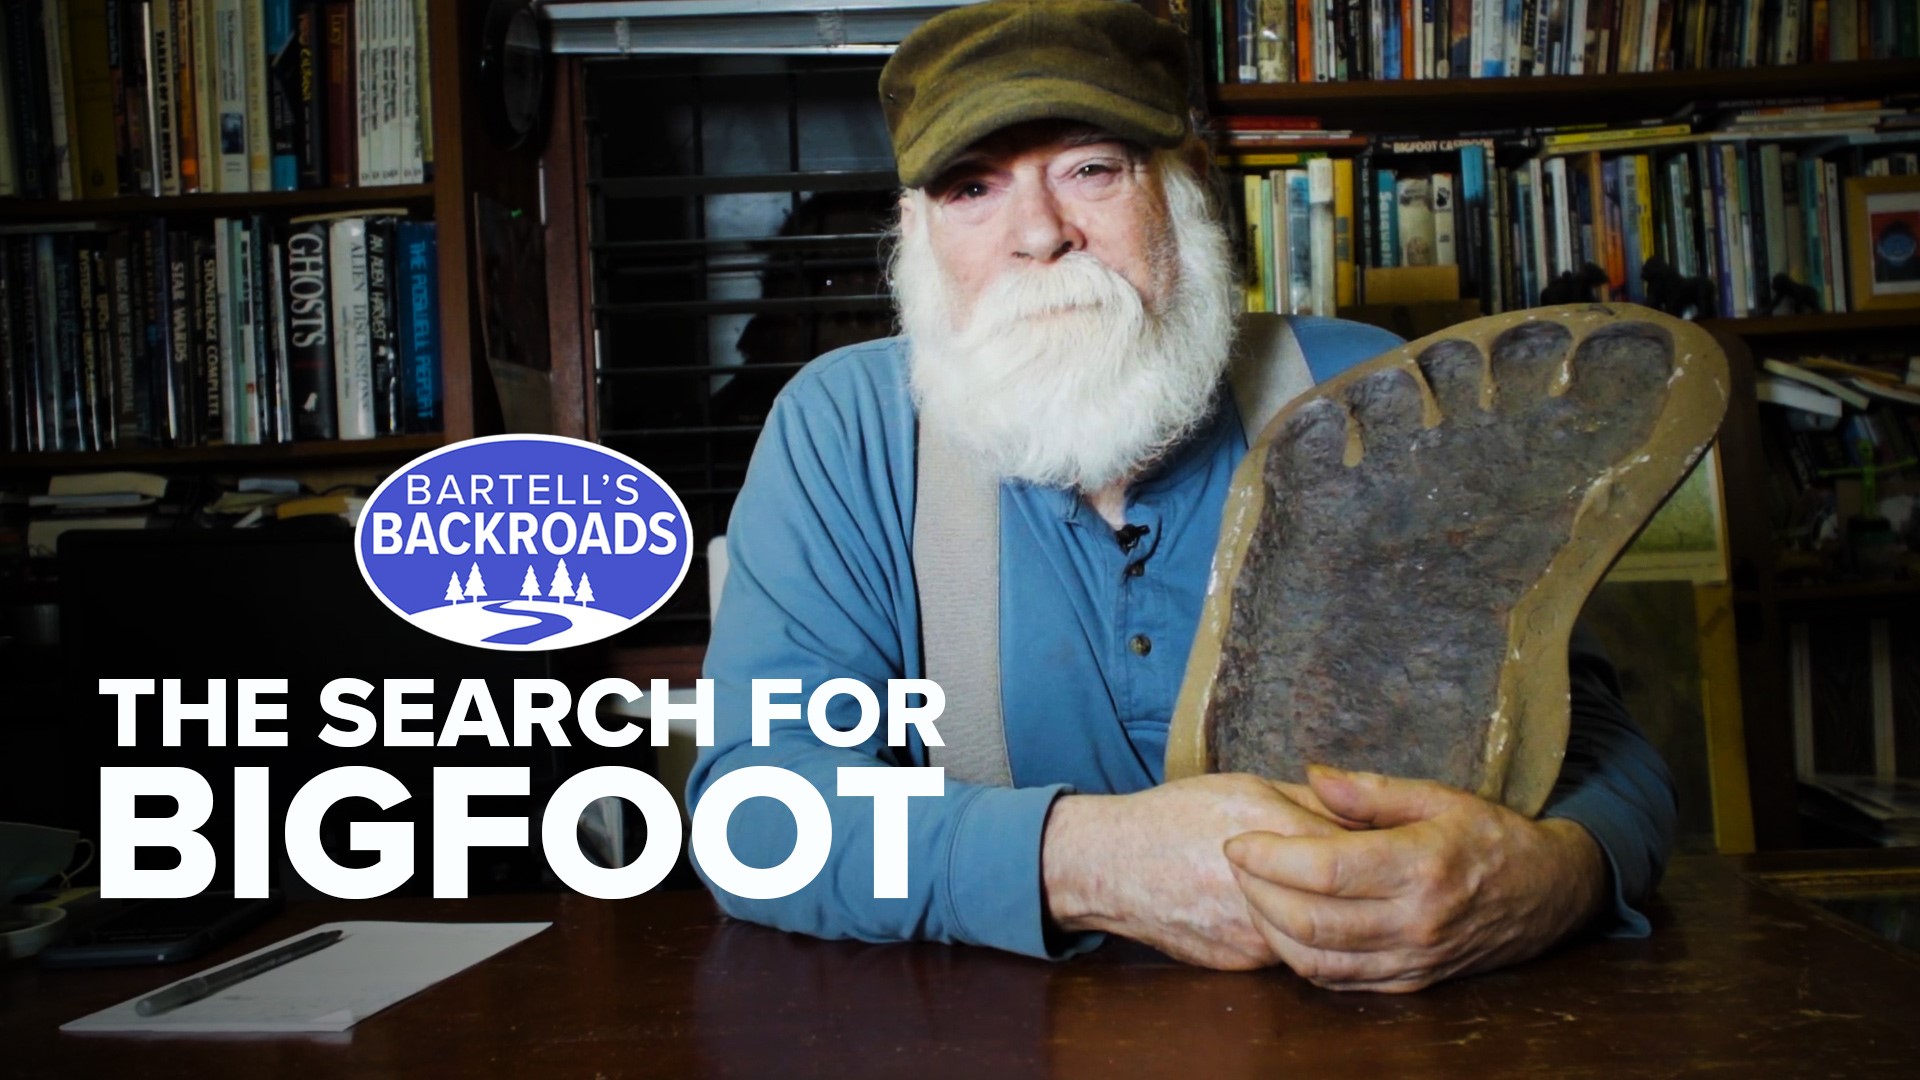 Felton man shares his vast collection of Bigfoot research and memorabilia.